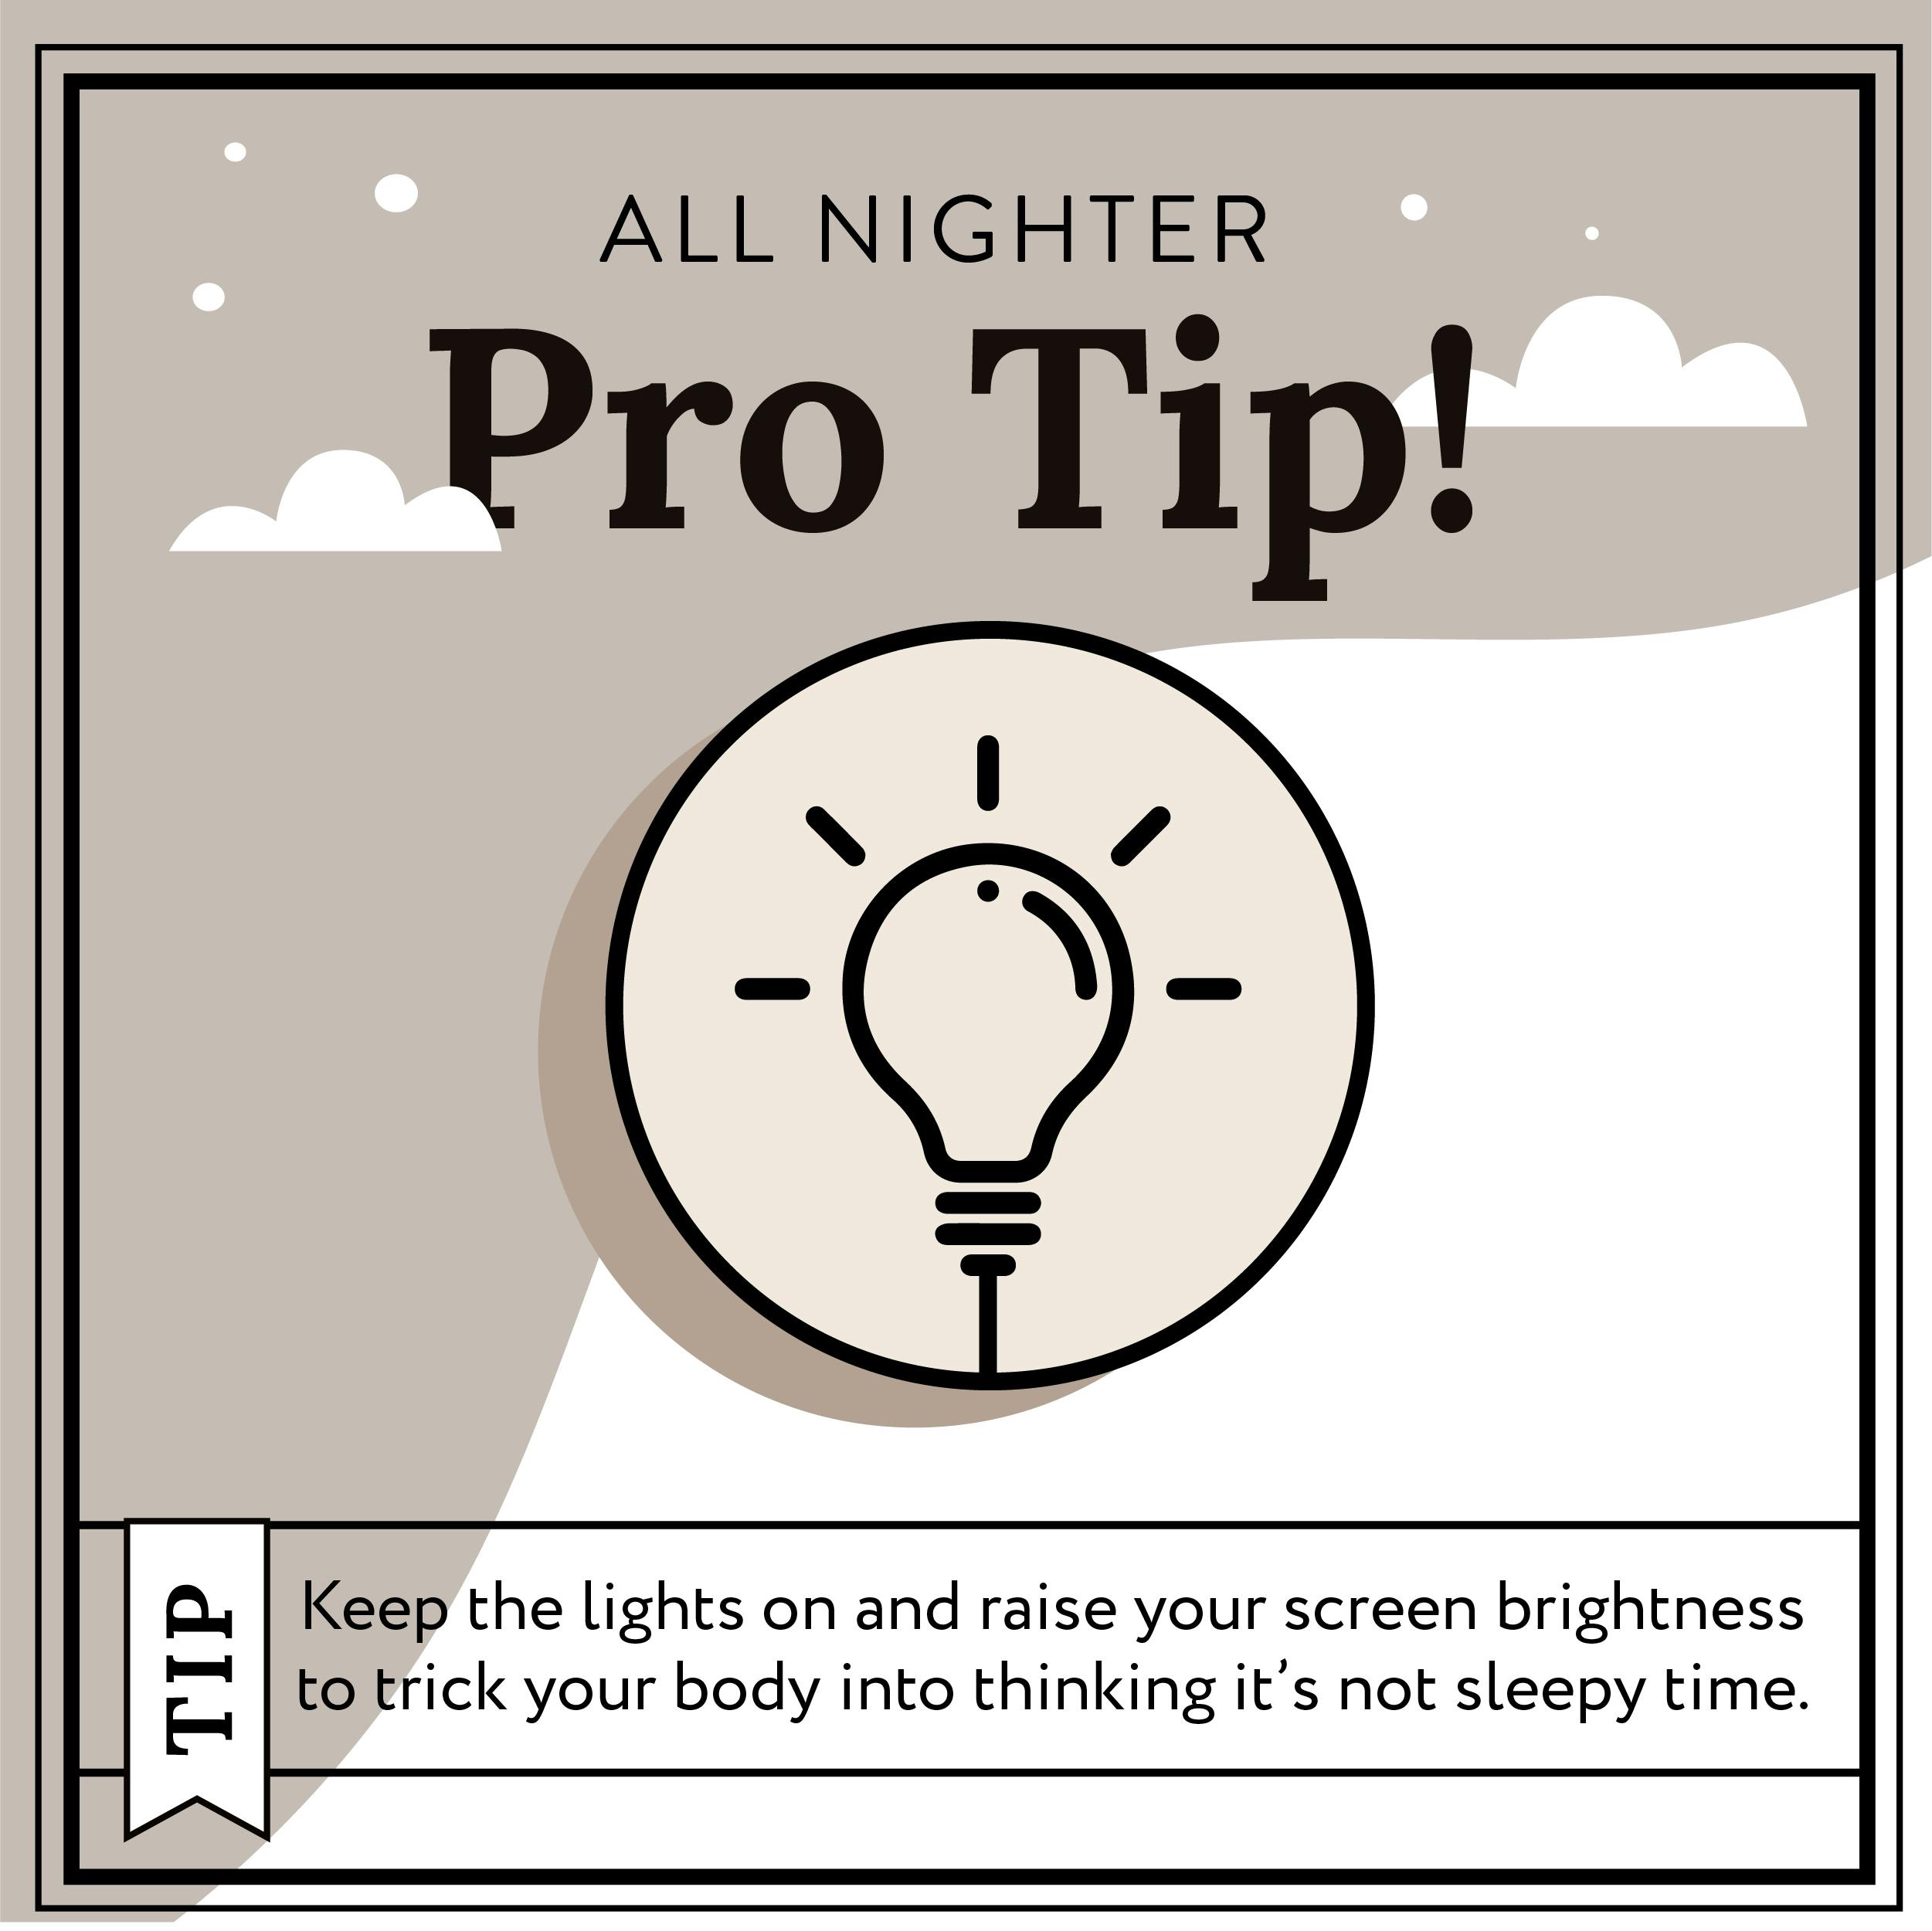 lightbulb with copy on it explaining how to use light to stay awake overnight